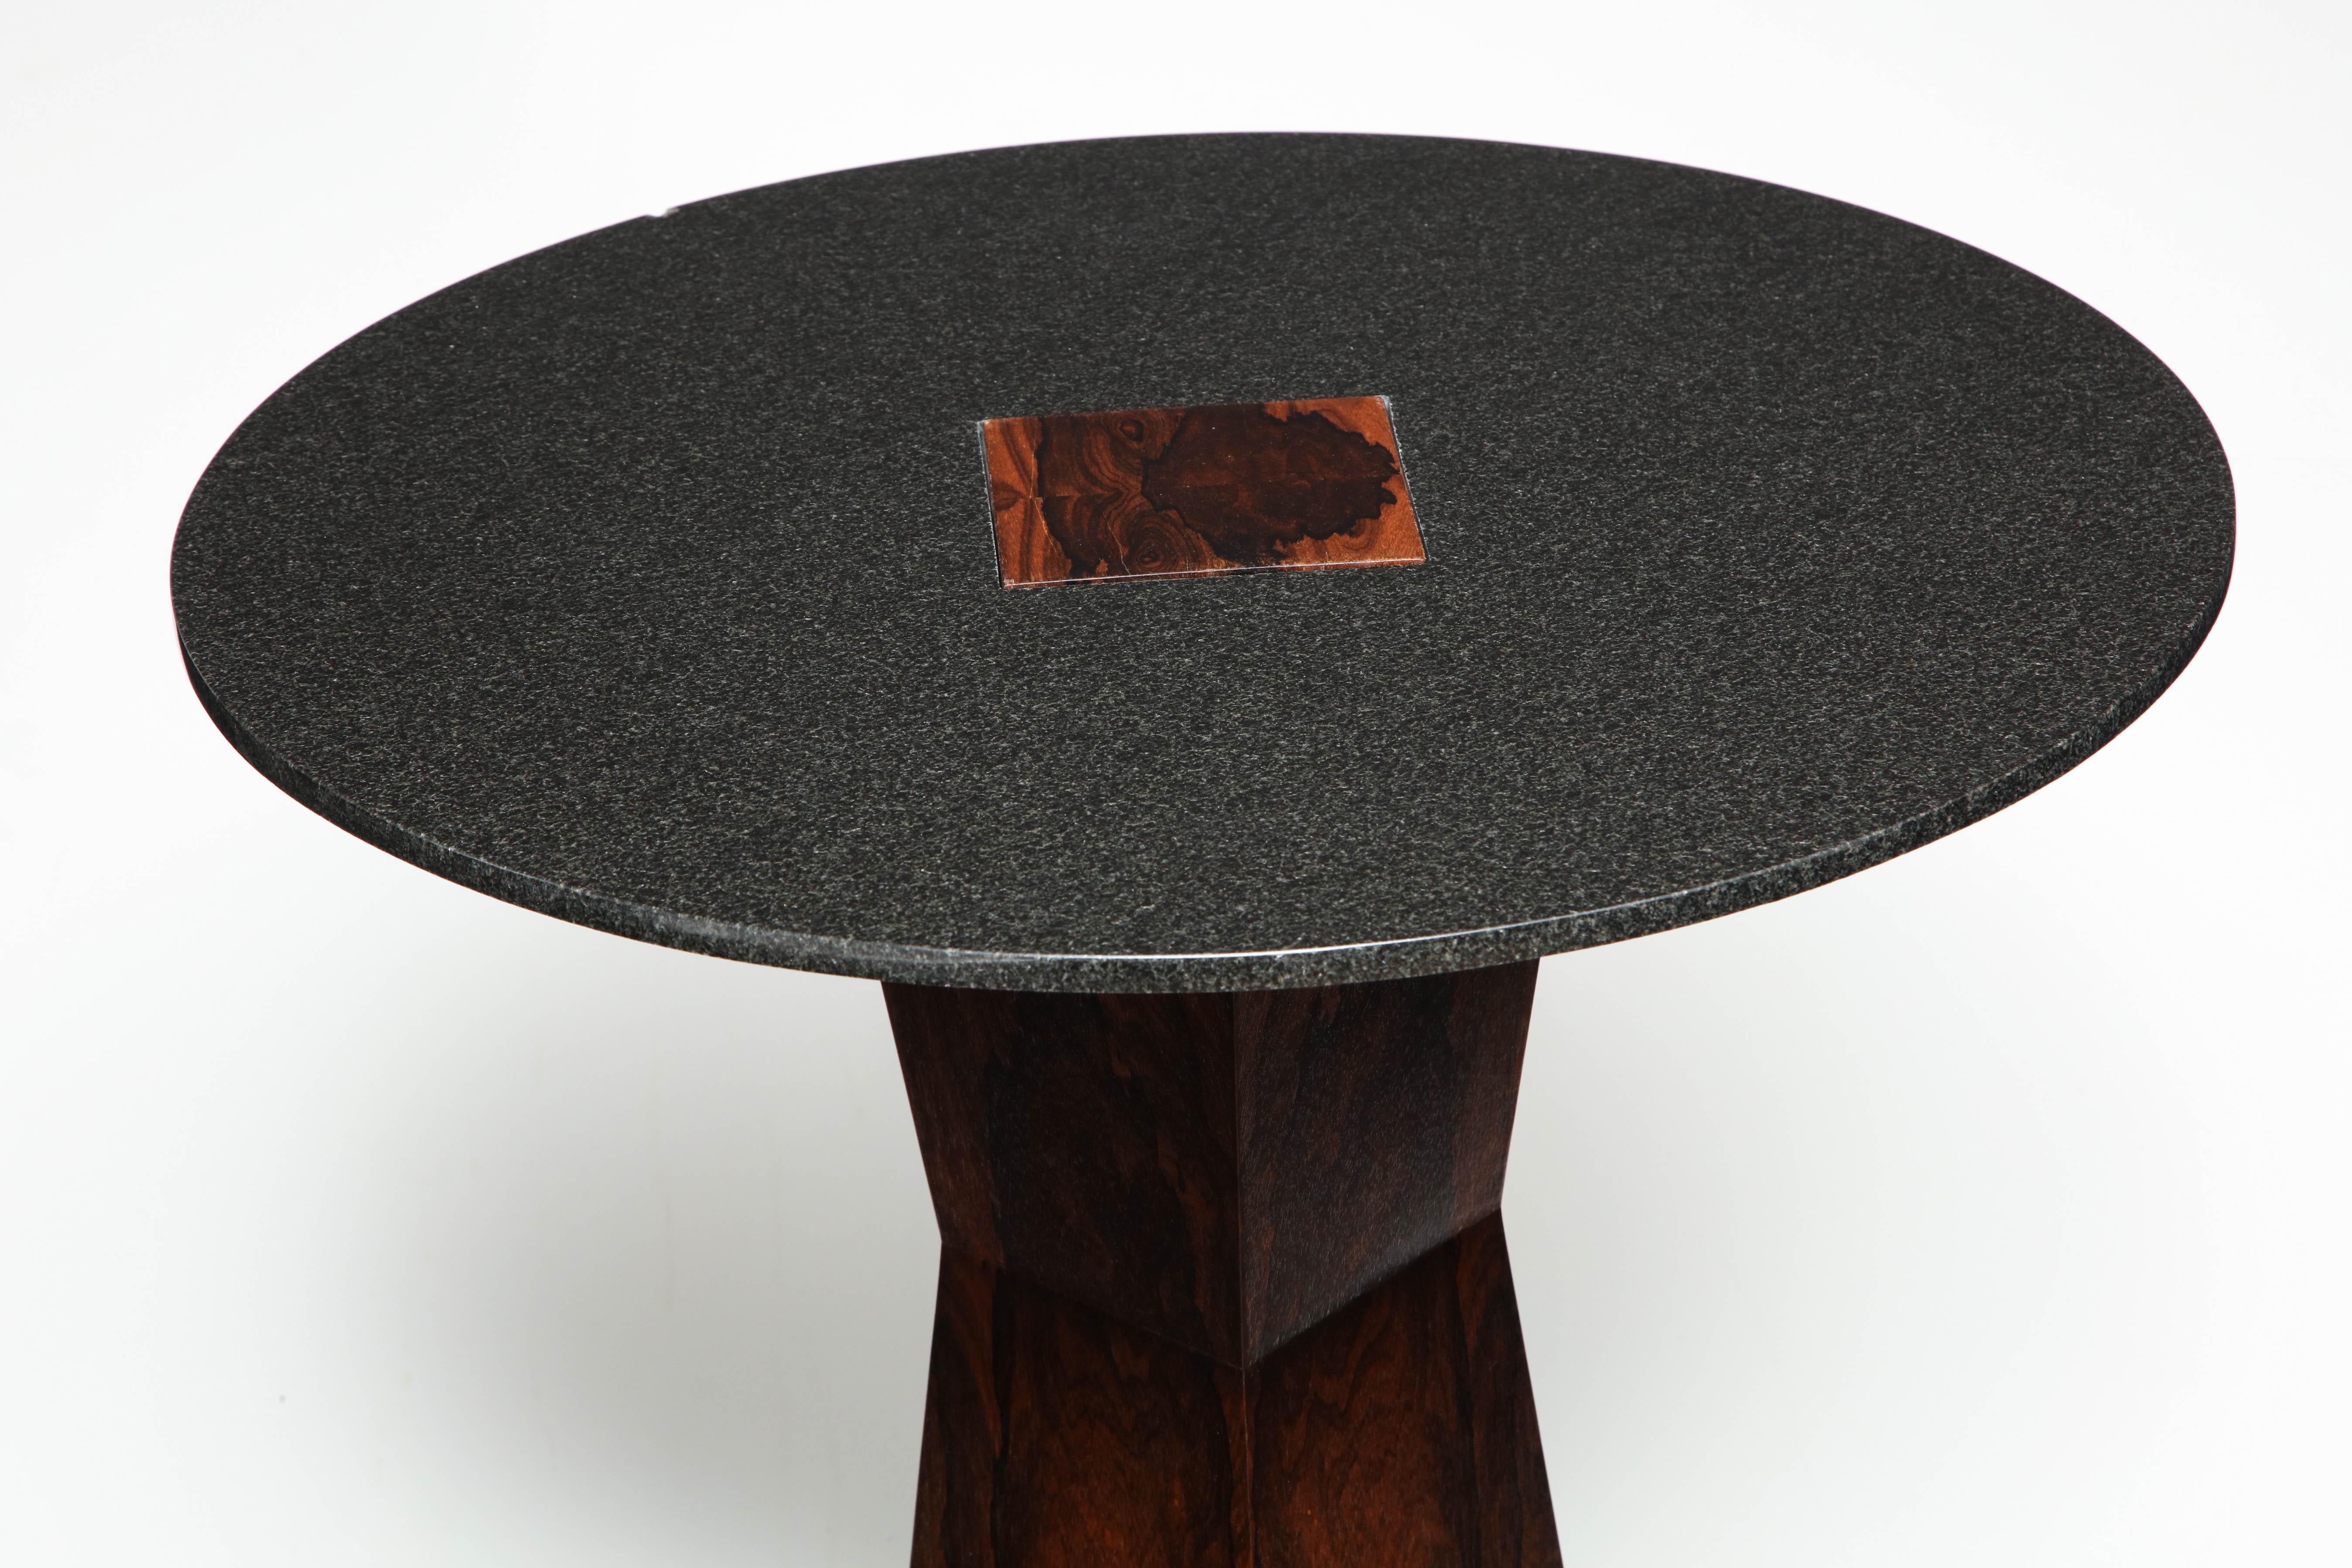 Mid-Century Modern Absolute Black Granite Side Table with Sculptural Wood Base